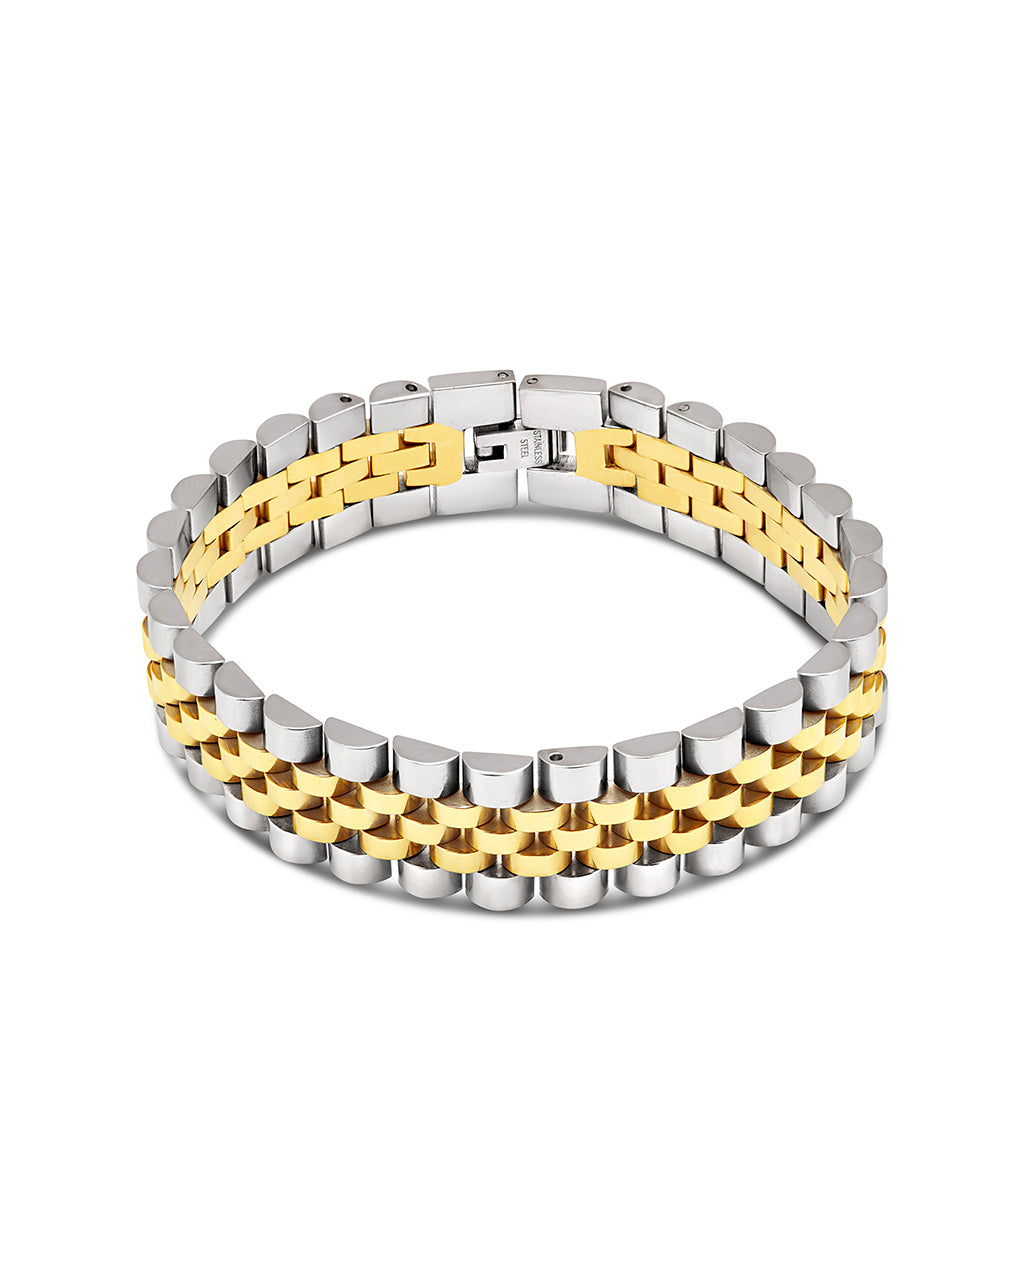 Style Tips for Mixing Silver & Gold Jewellery